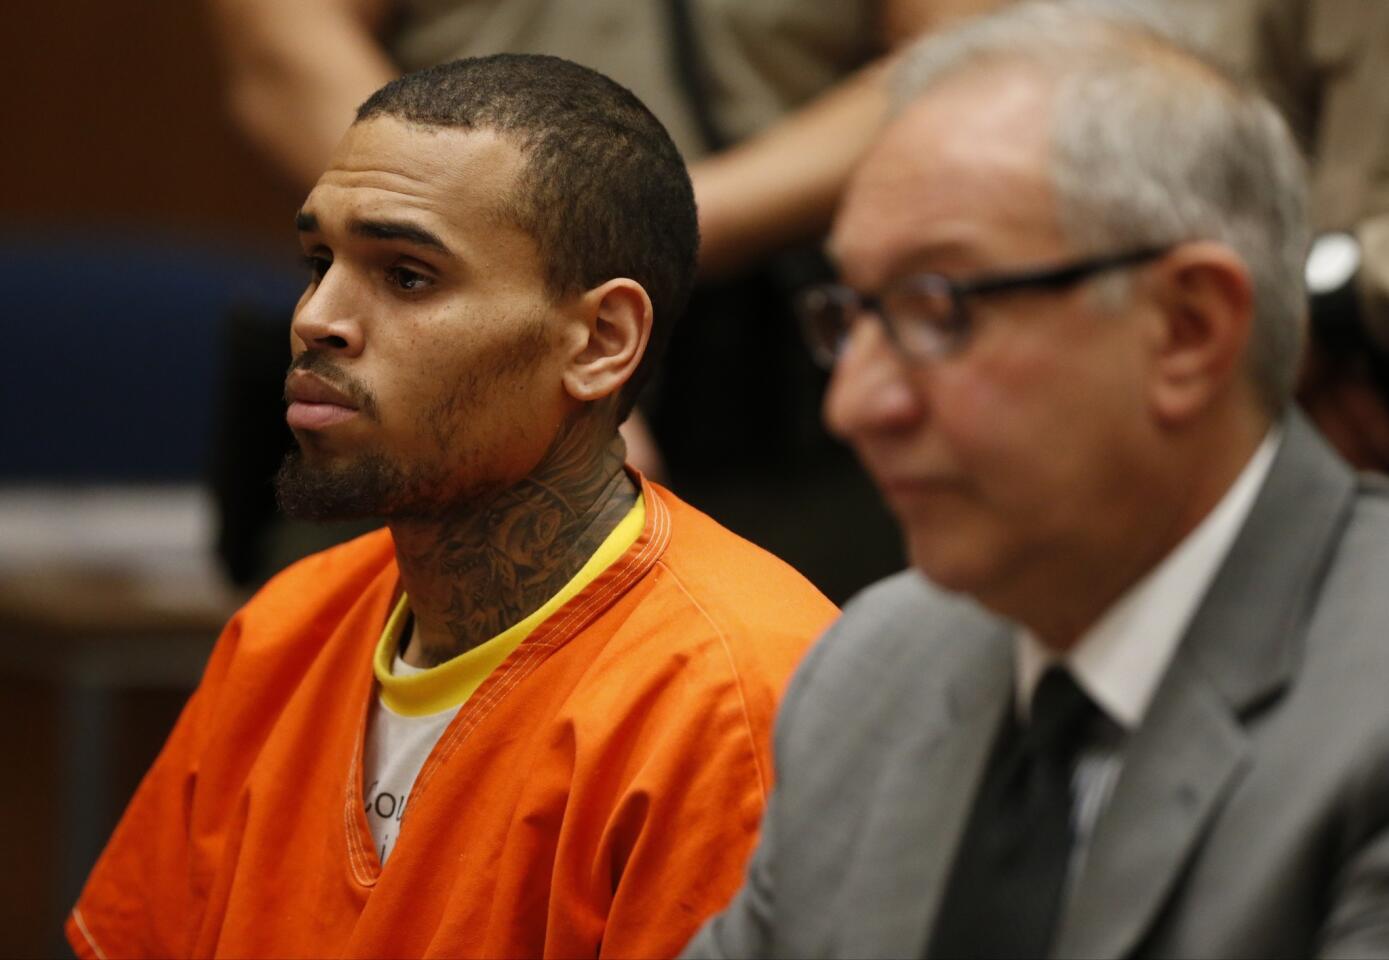 Chris Brown addresses fans from jail